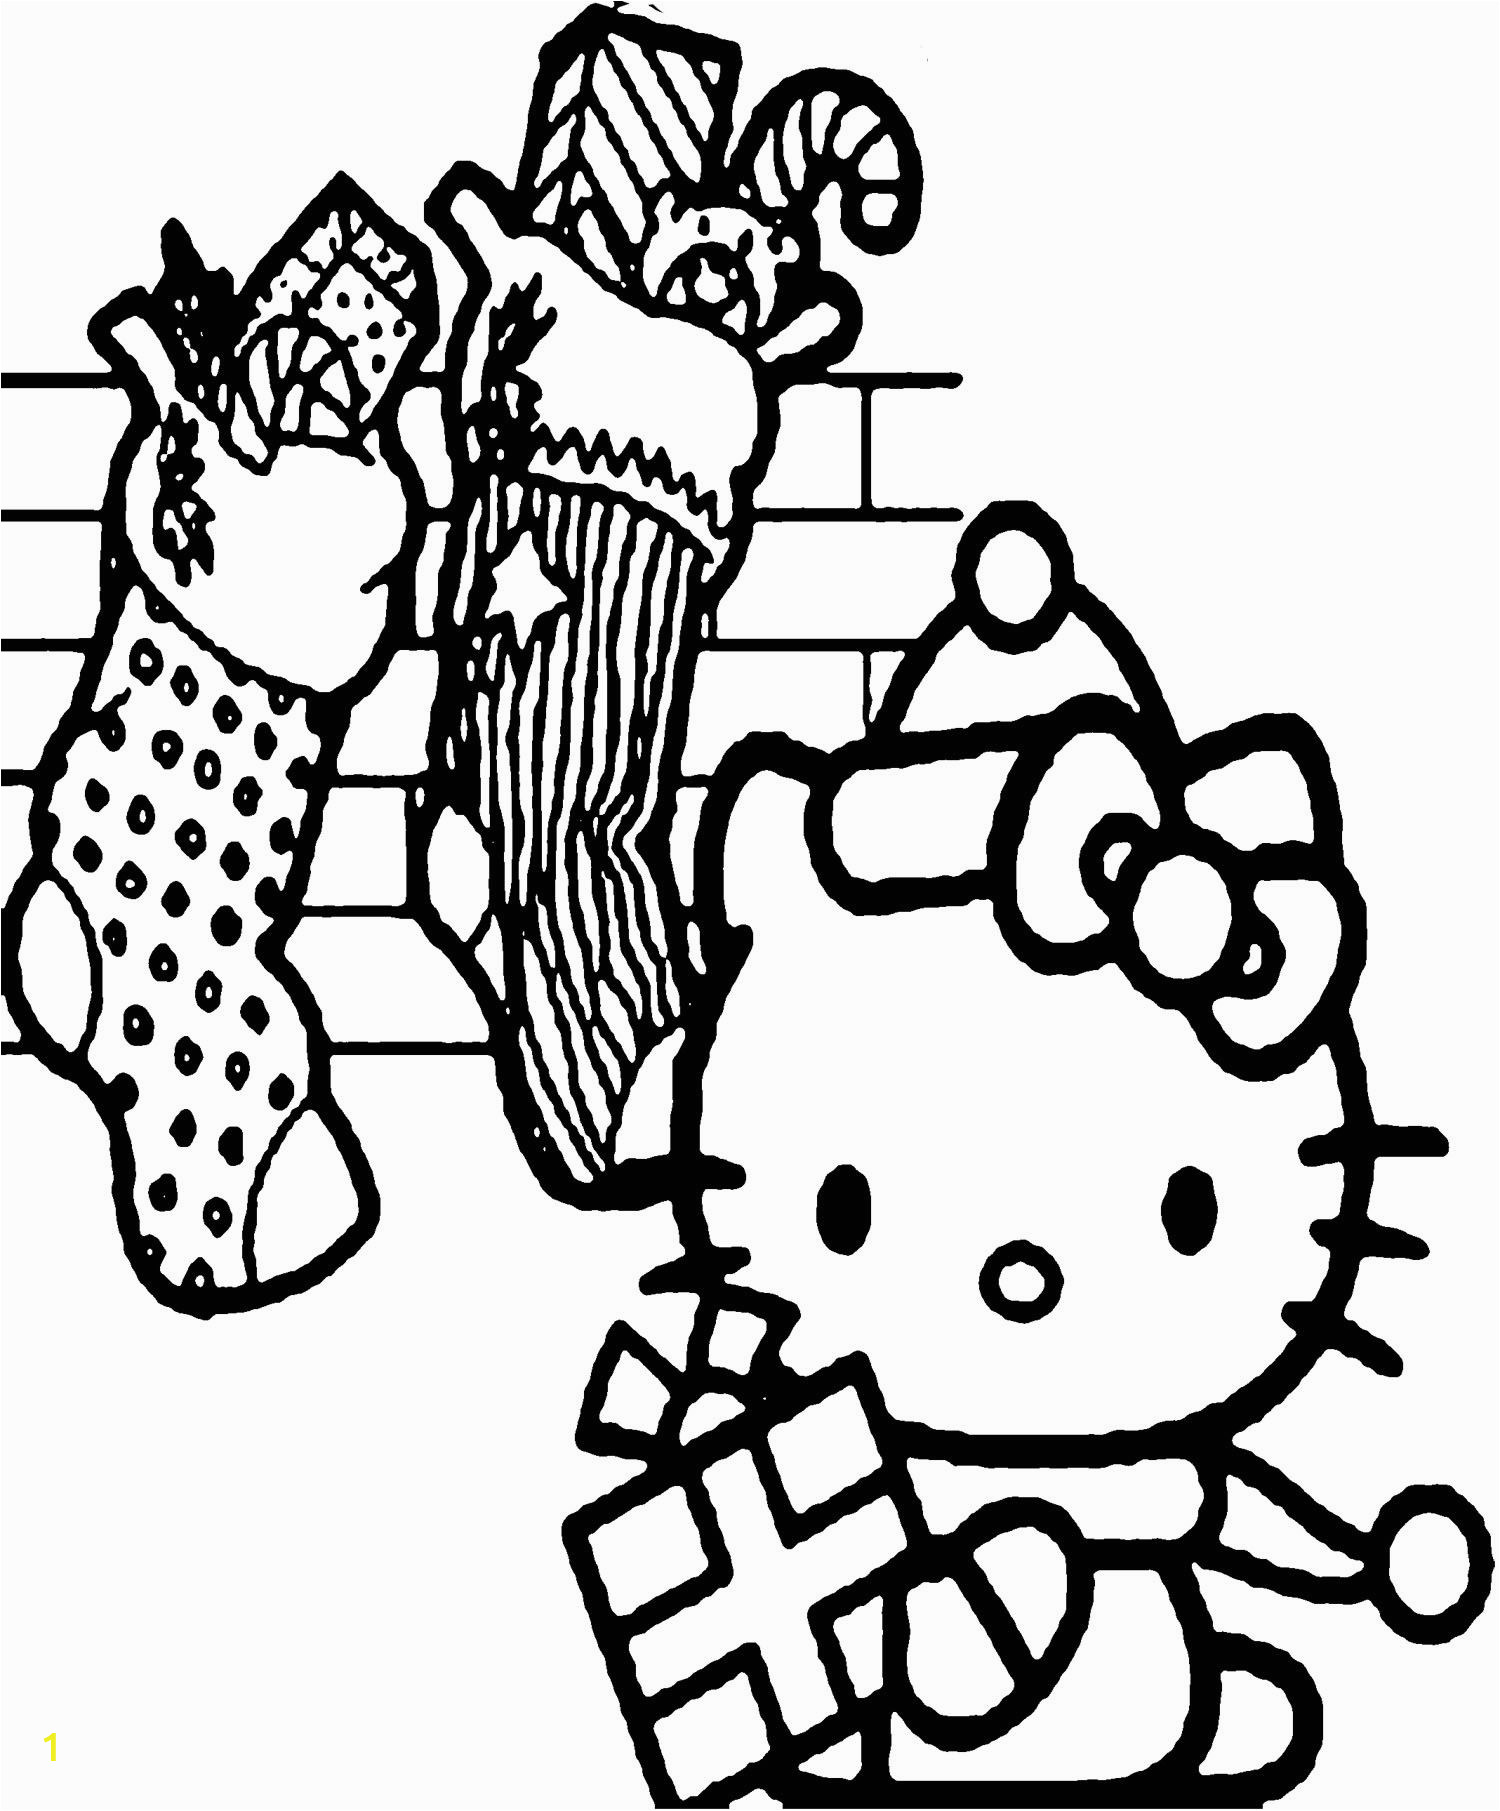 Merry Christmas Hello Kitty Coloring Pages Hello Kitty Many Gift In the Christmas Coloring Page